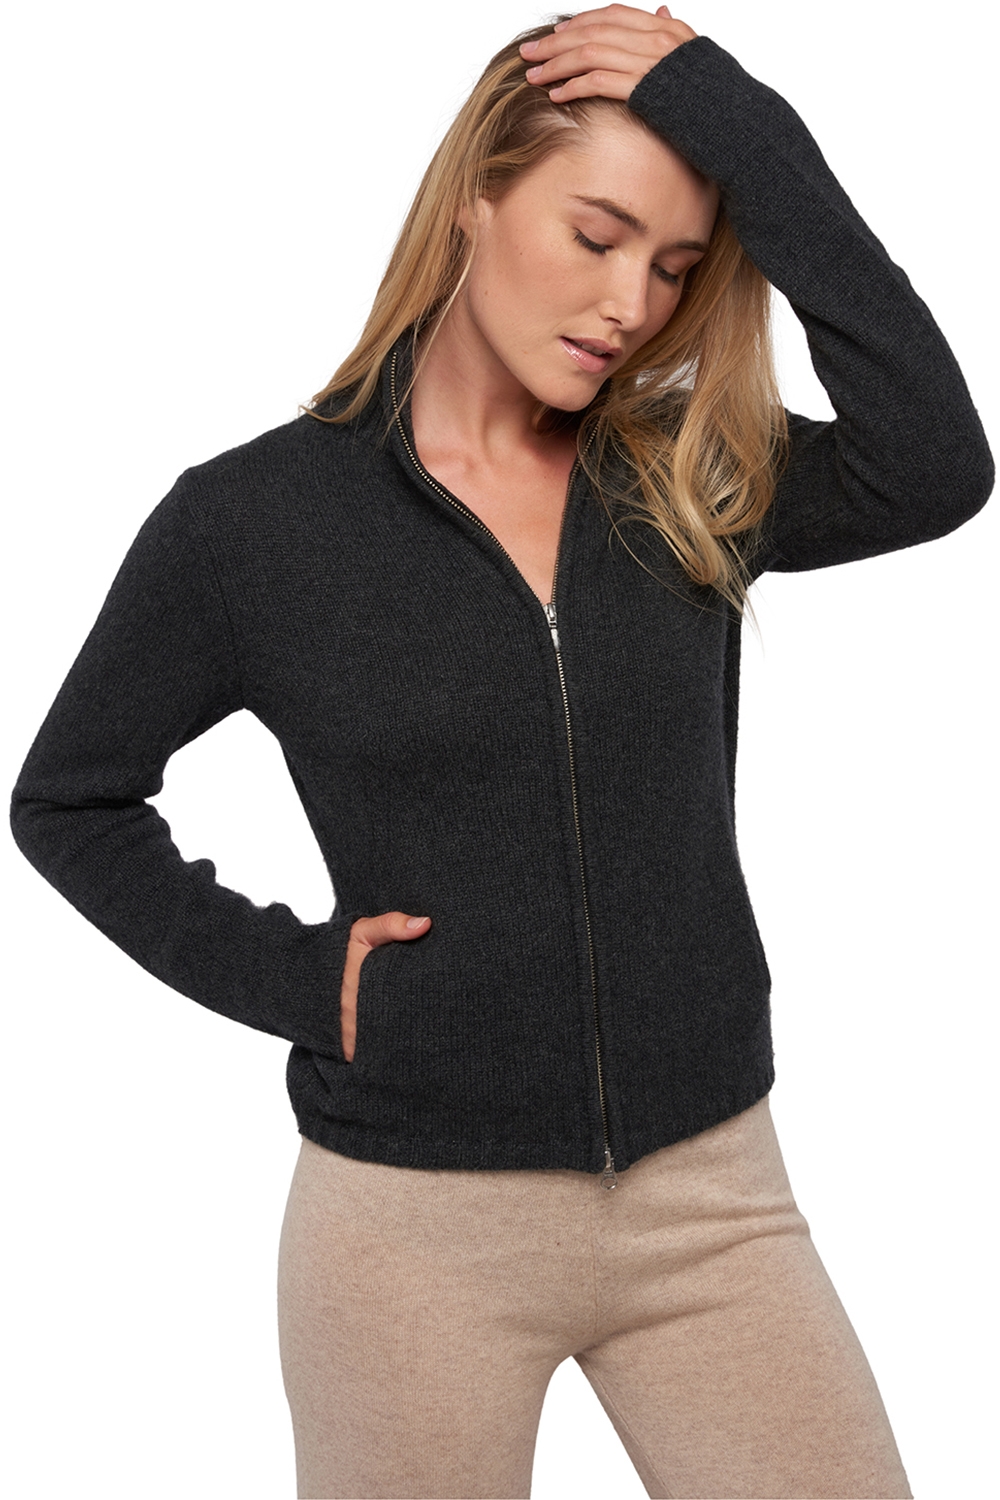 Cashmere ladies timeless classics elodie charcoal marl xs